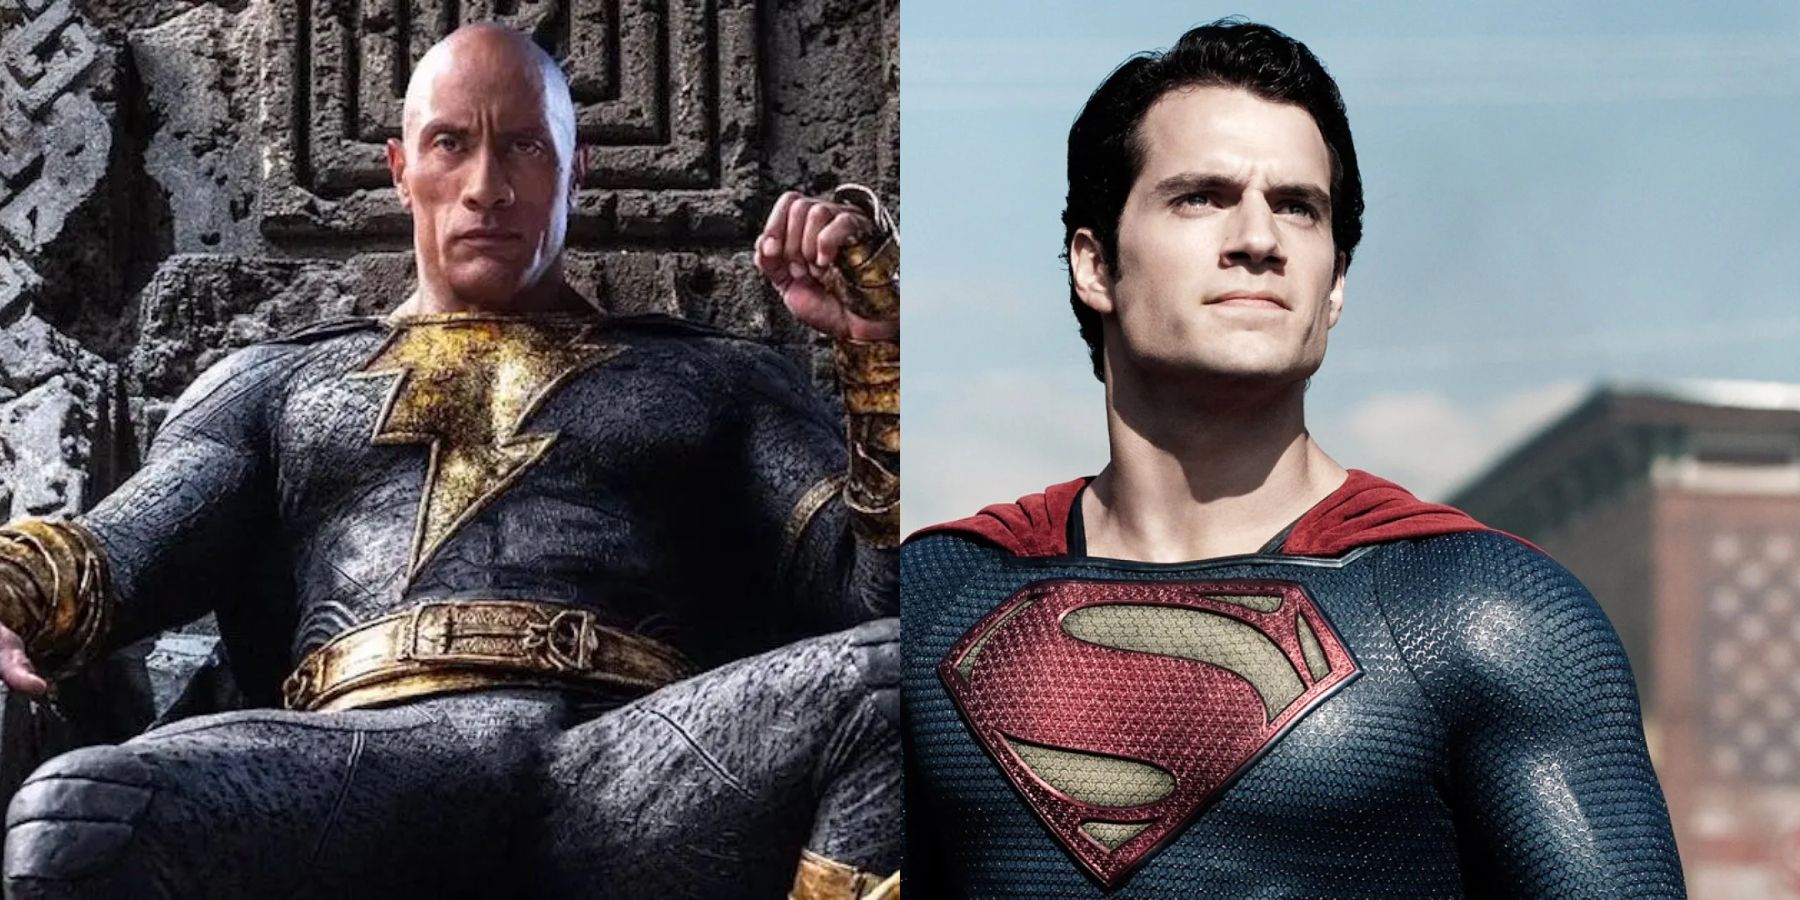 Is Superman in 'Black Adam'? The Truth Has Been Revealed